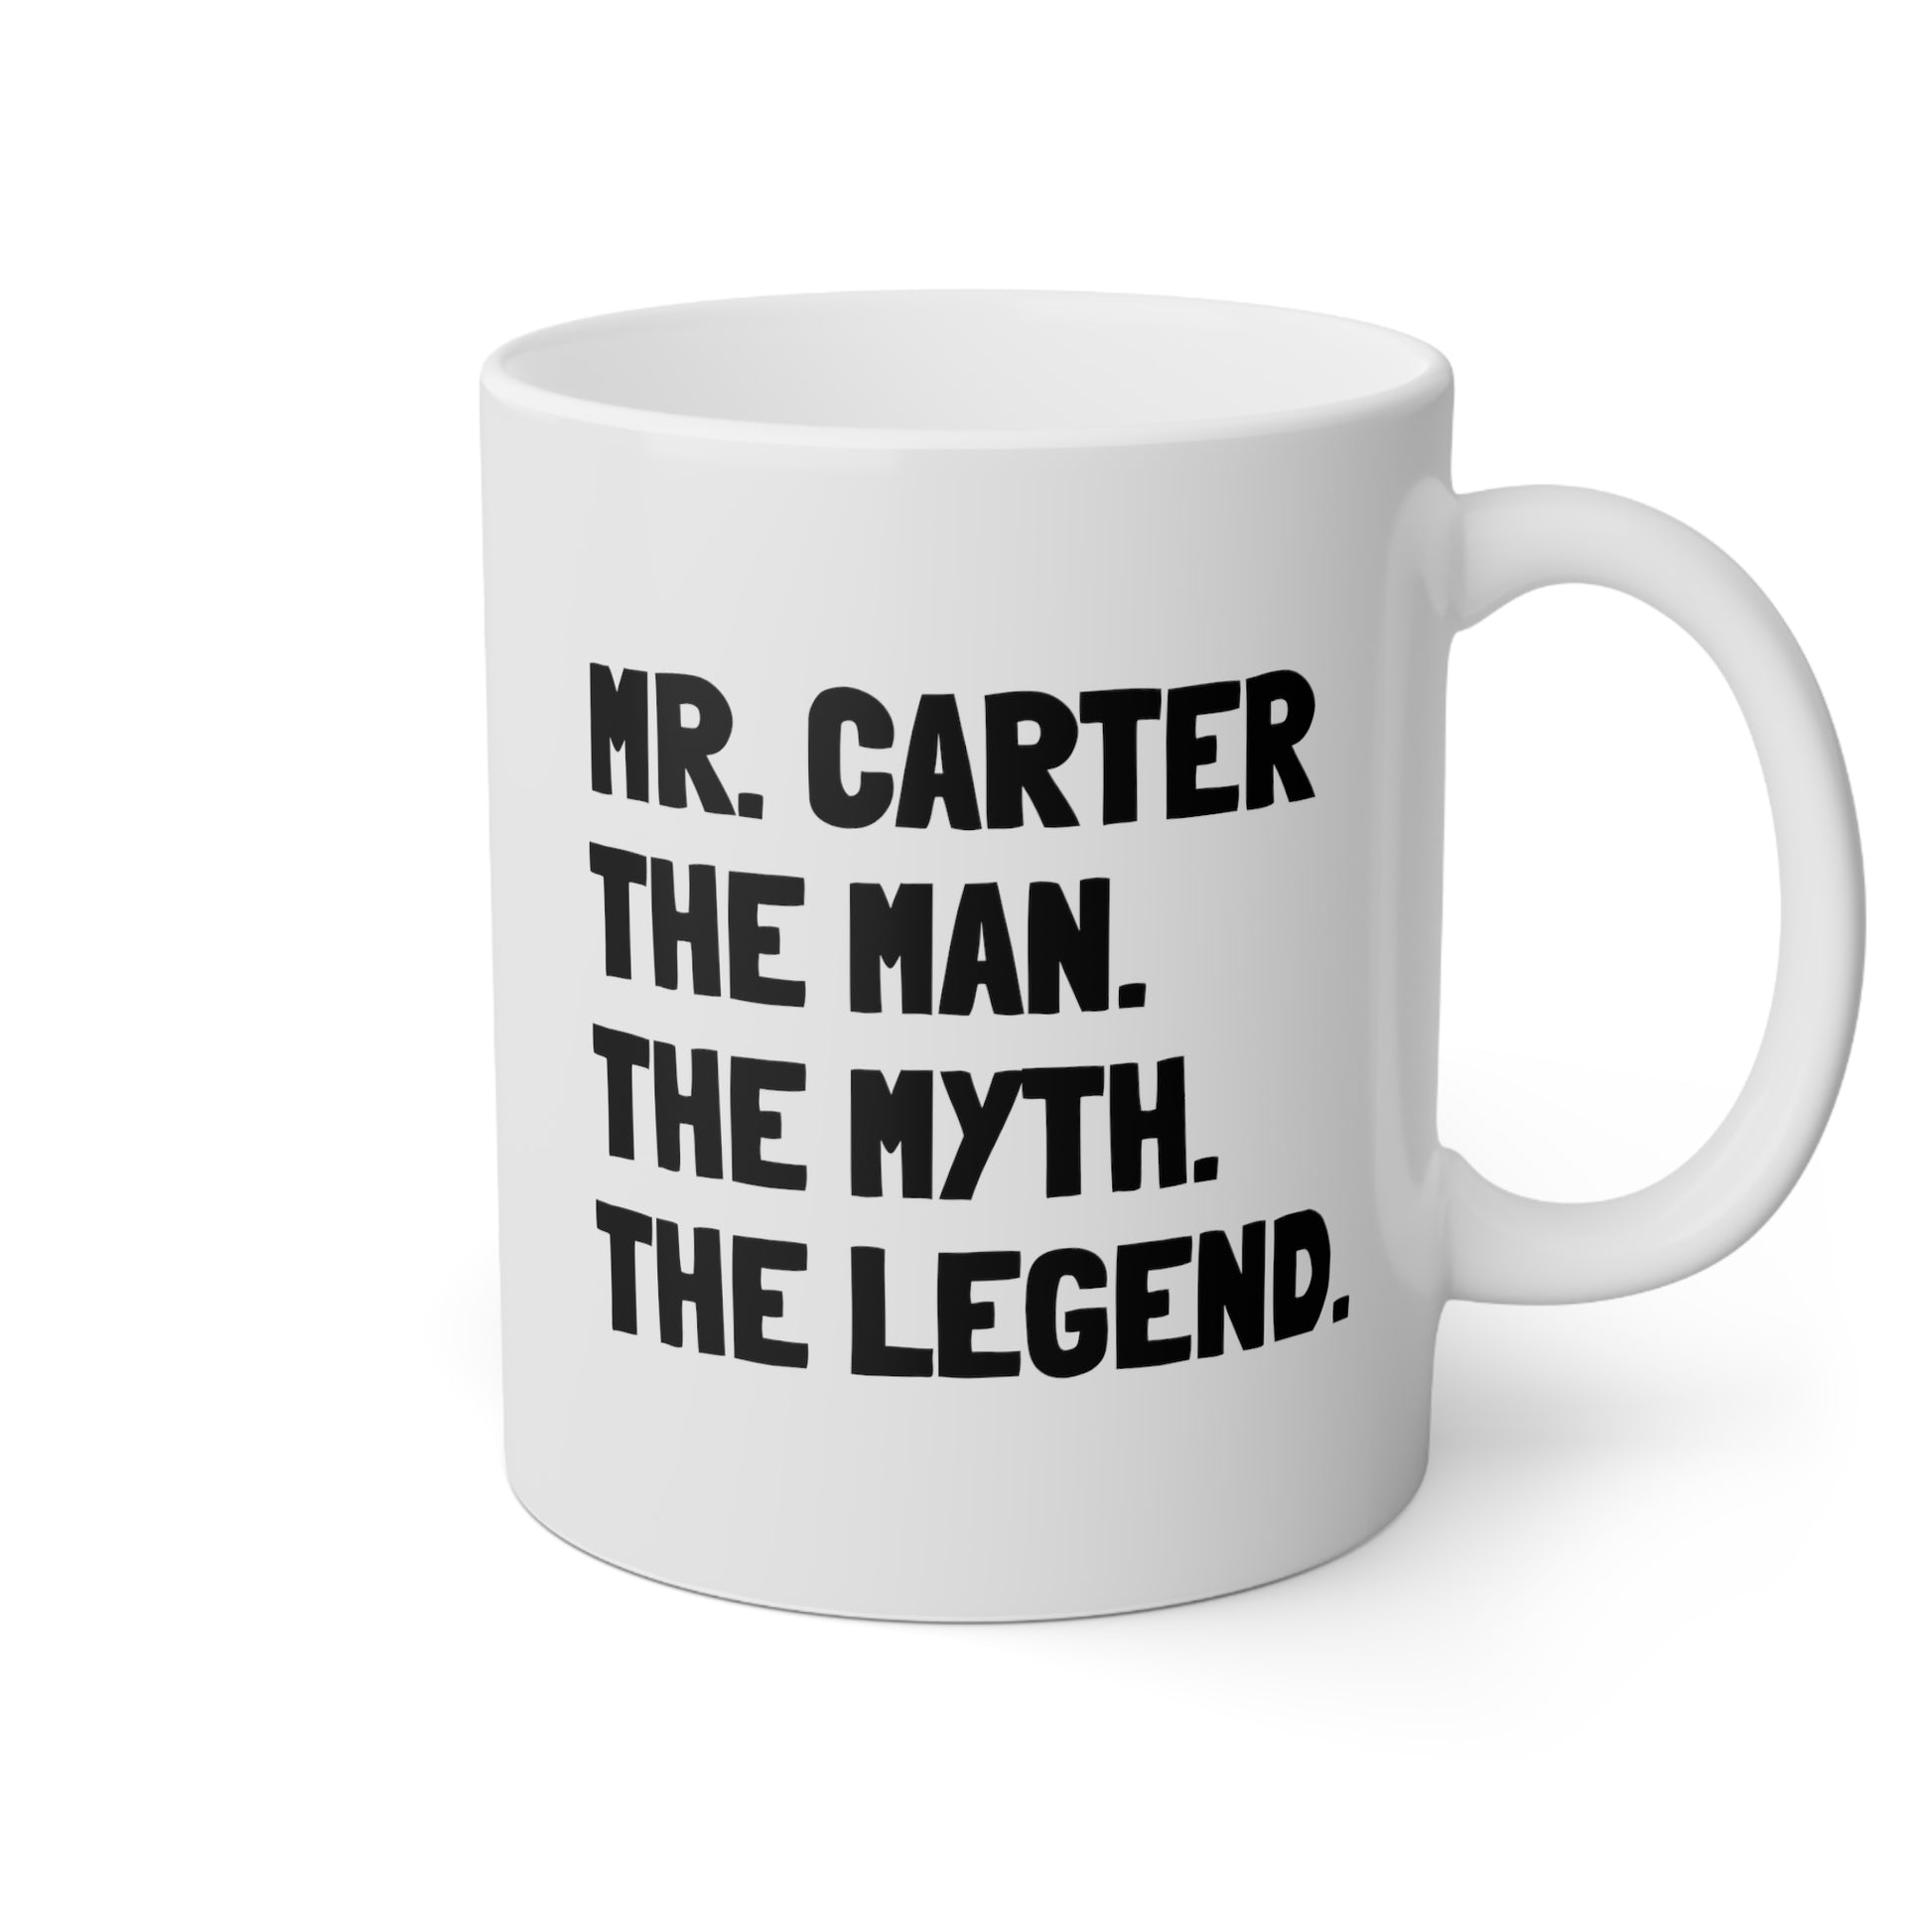 Mr. Carter The Man. The Myth. The Legend. 11oz white funny large coffee mug gift for male teacher end of year appreciation custom name waveywares wavey wares wavywares wavy wares